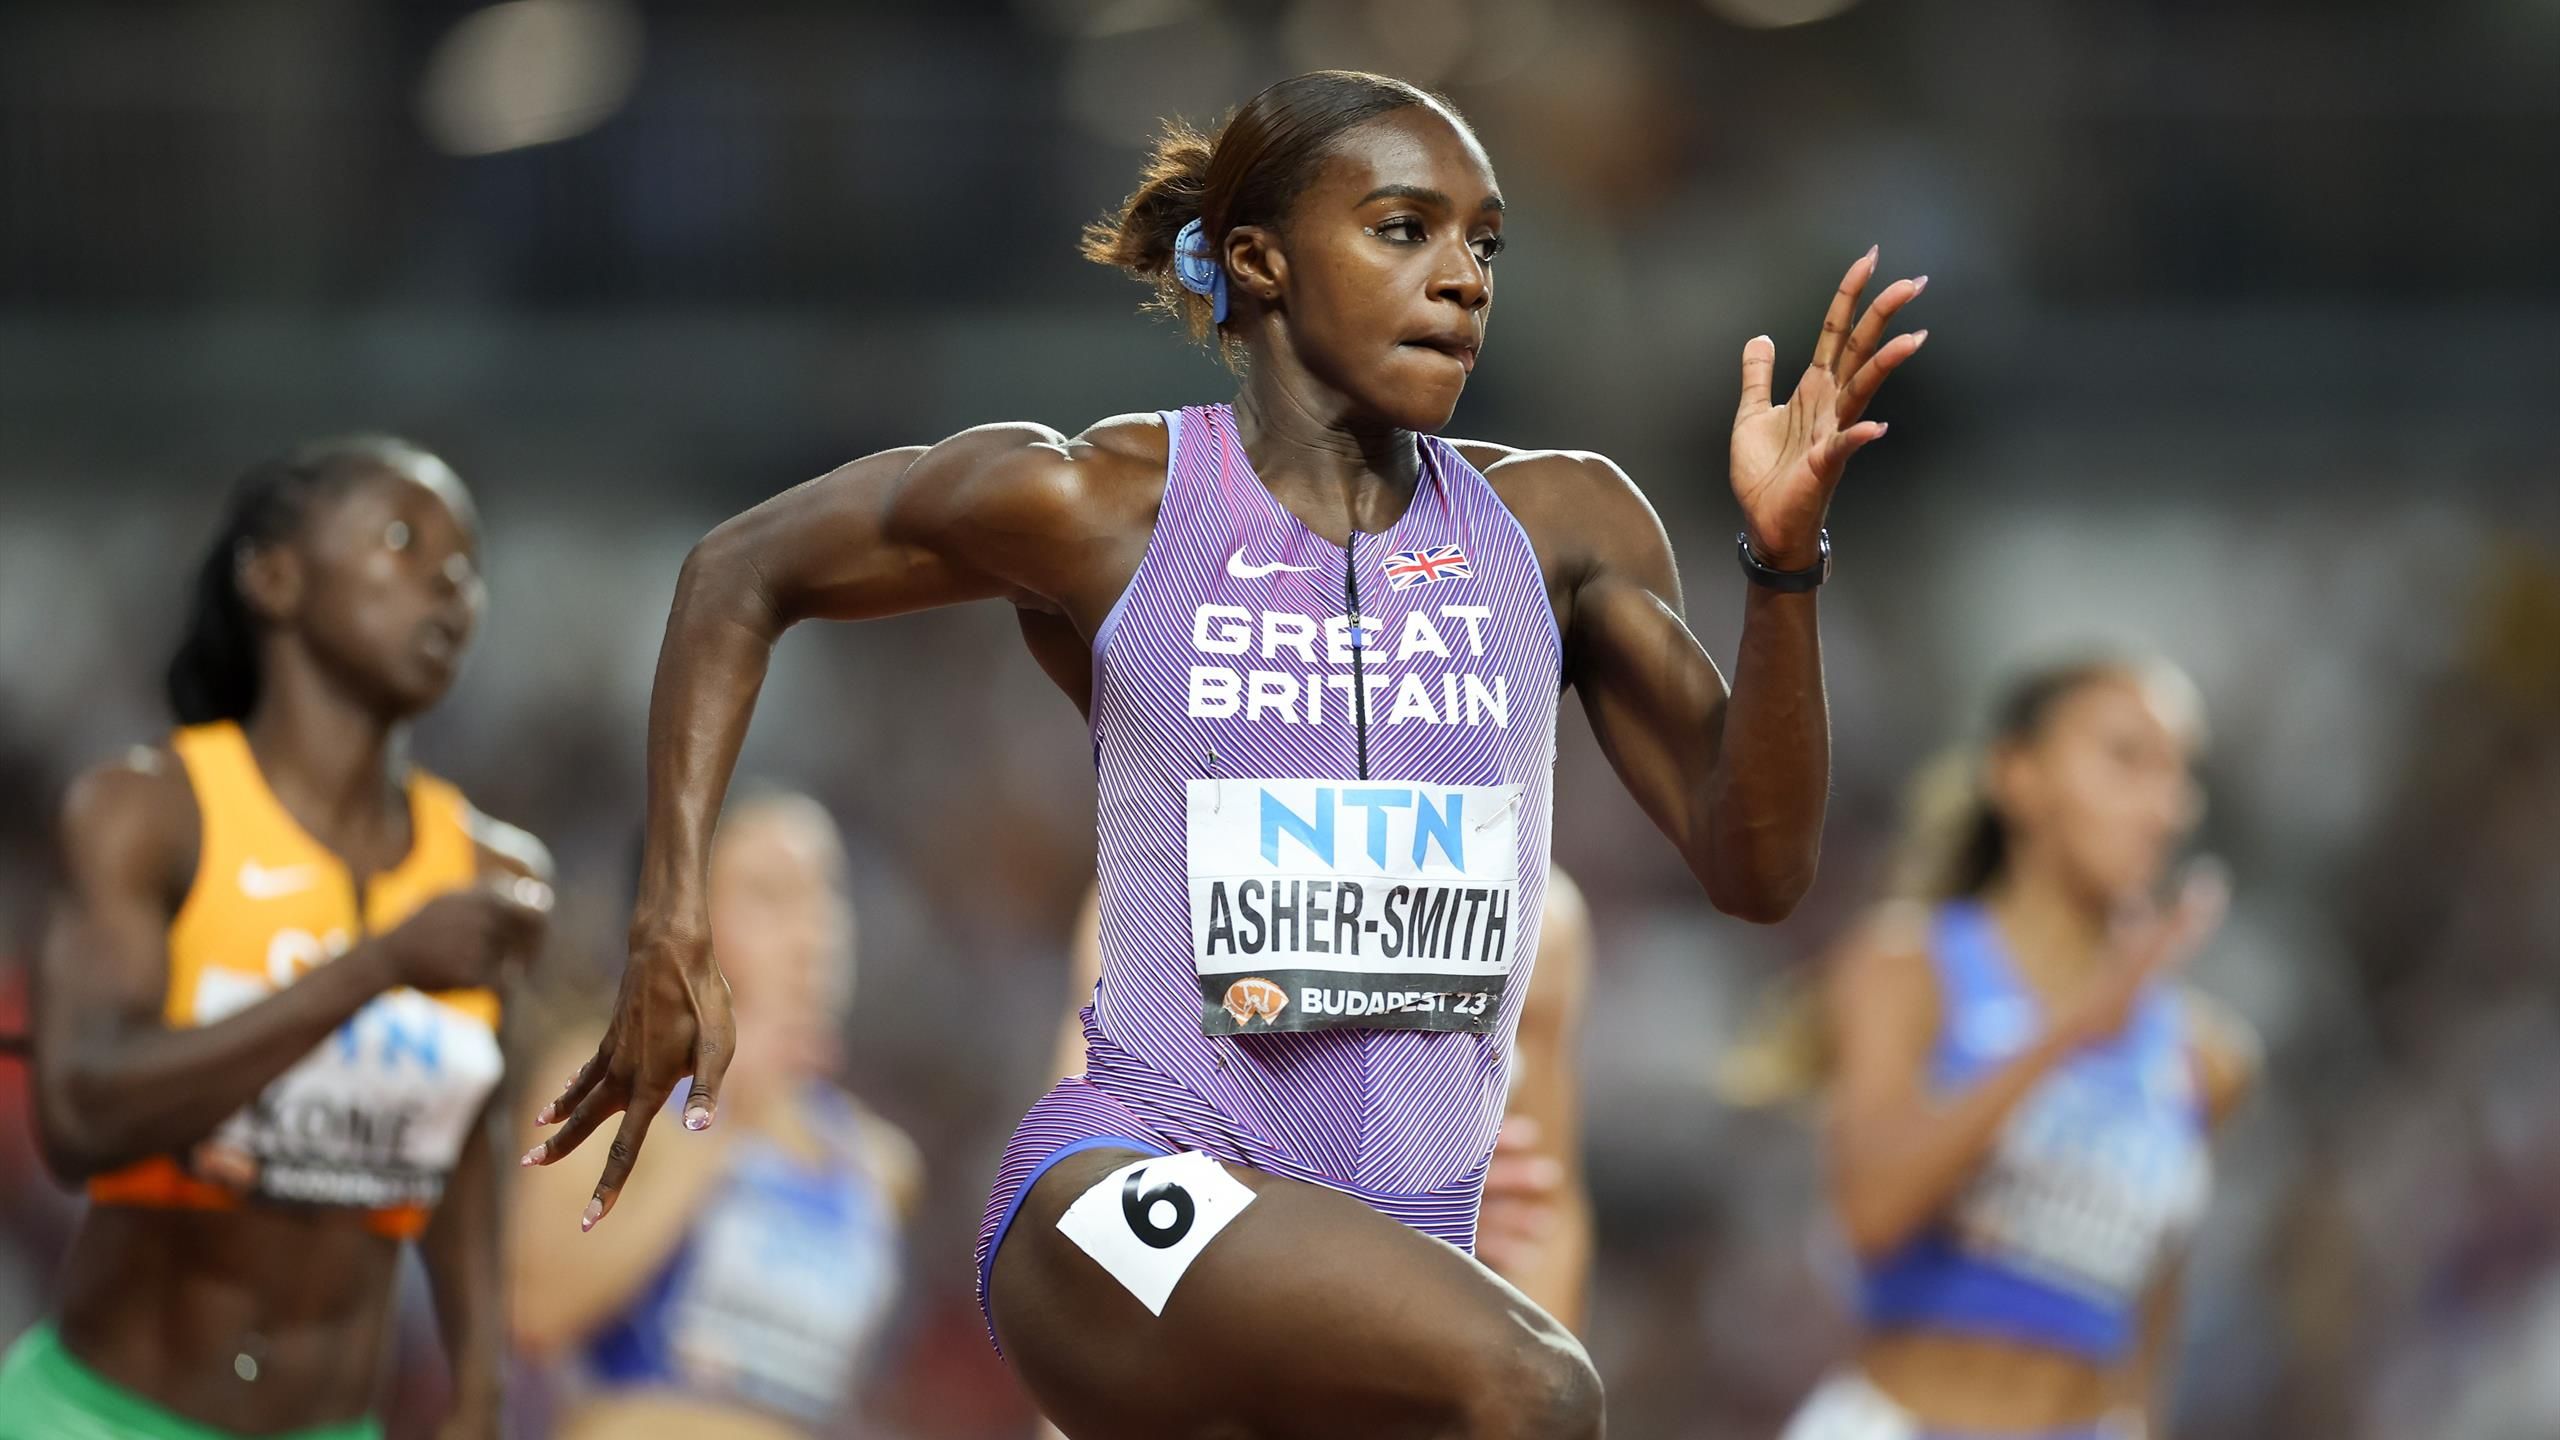 Asher-Smith calls for more people like ‘phenomenal’ Southgate in athletics to push for diversity